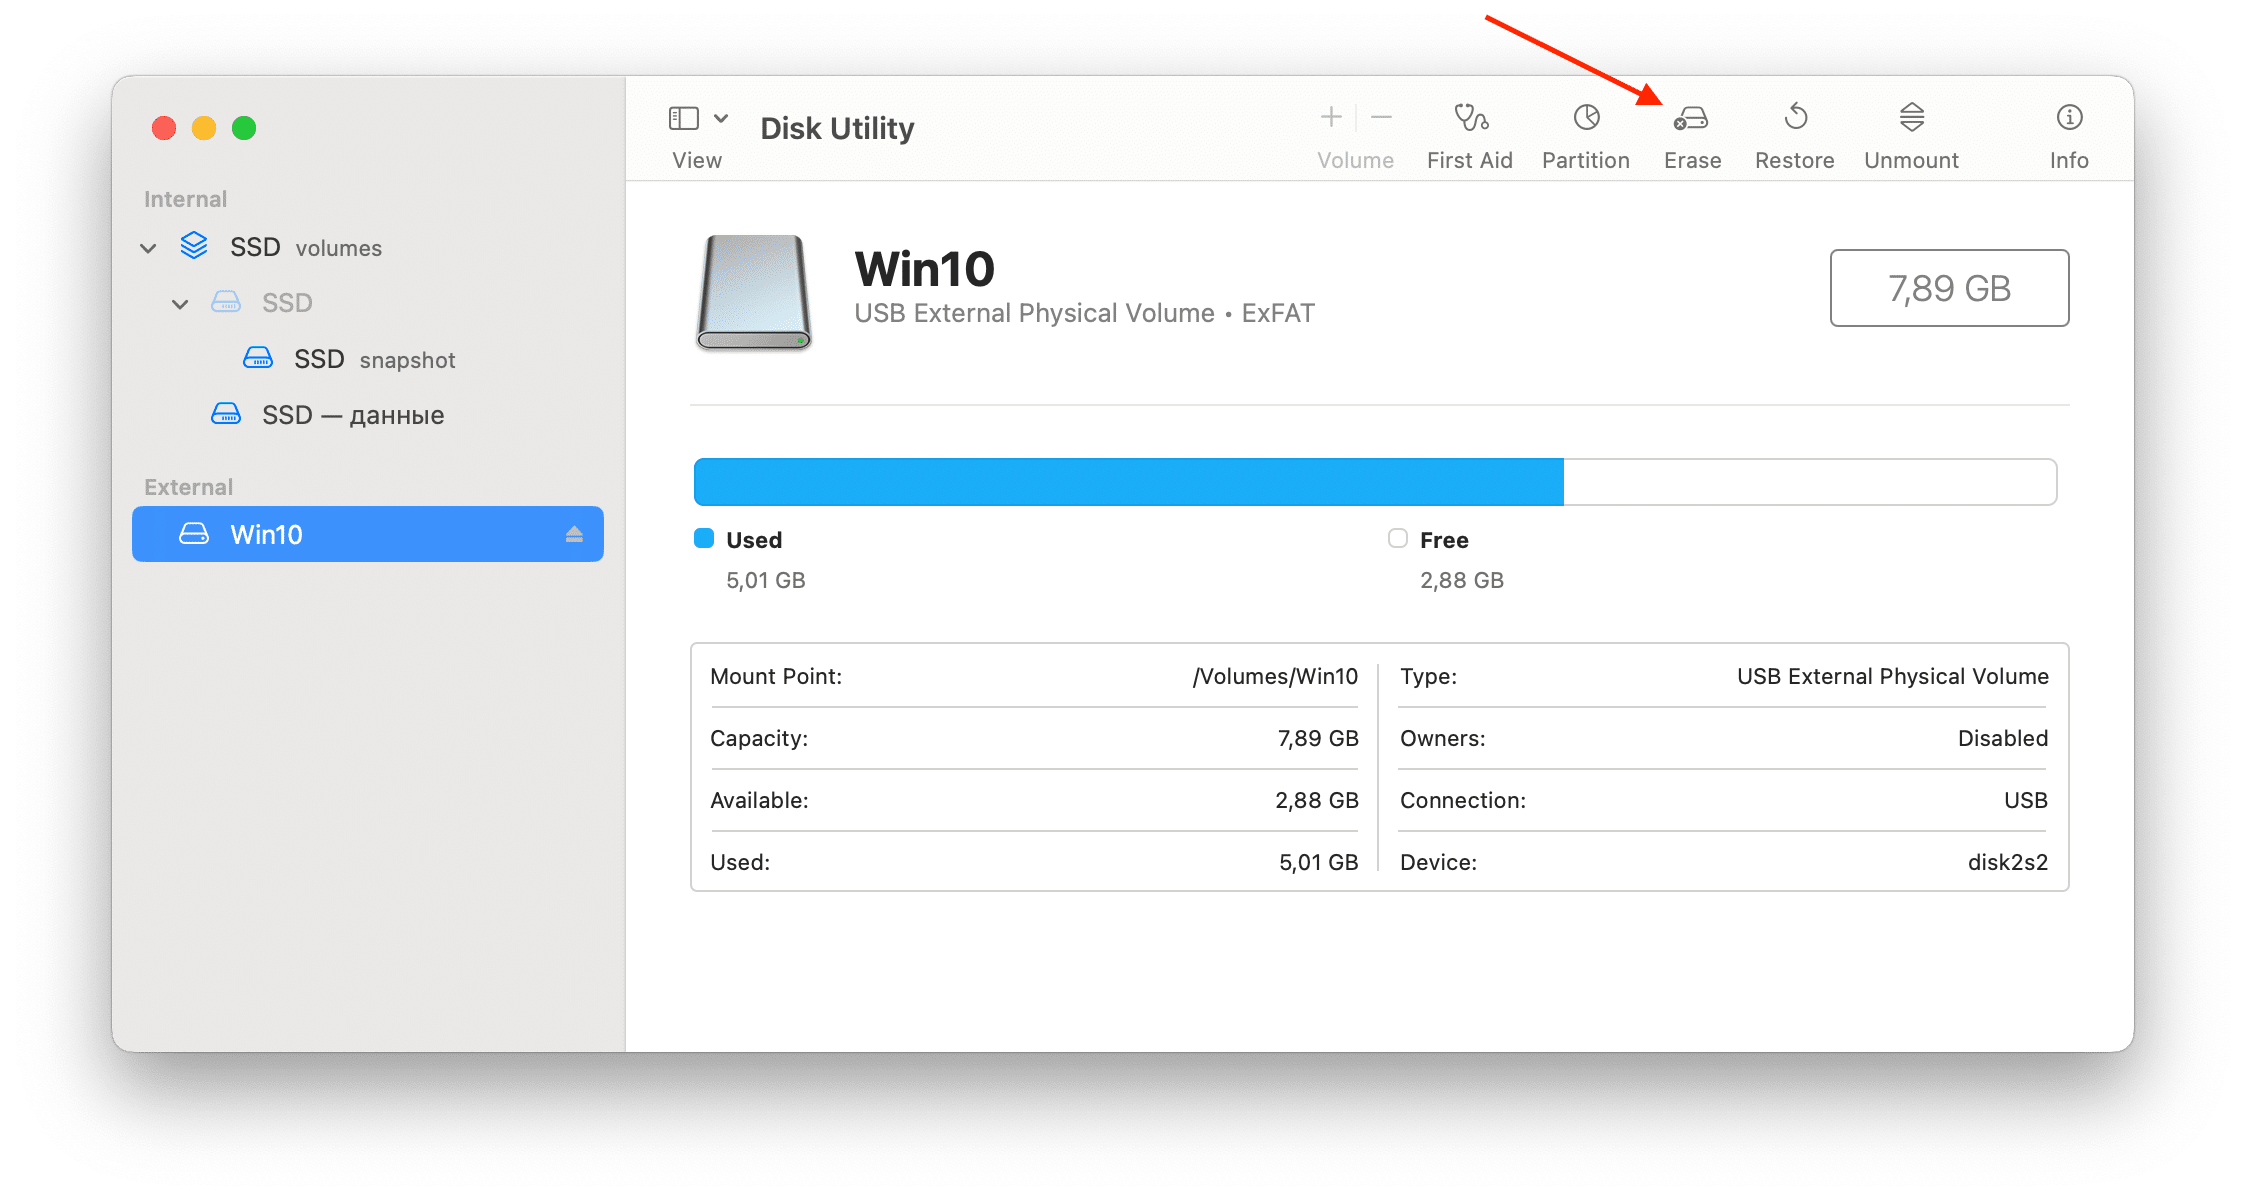 Disk Utility with the Erase button highlighted